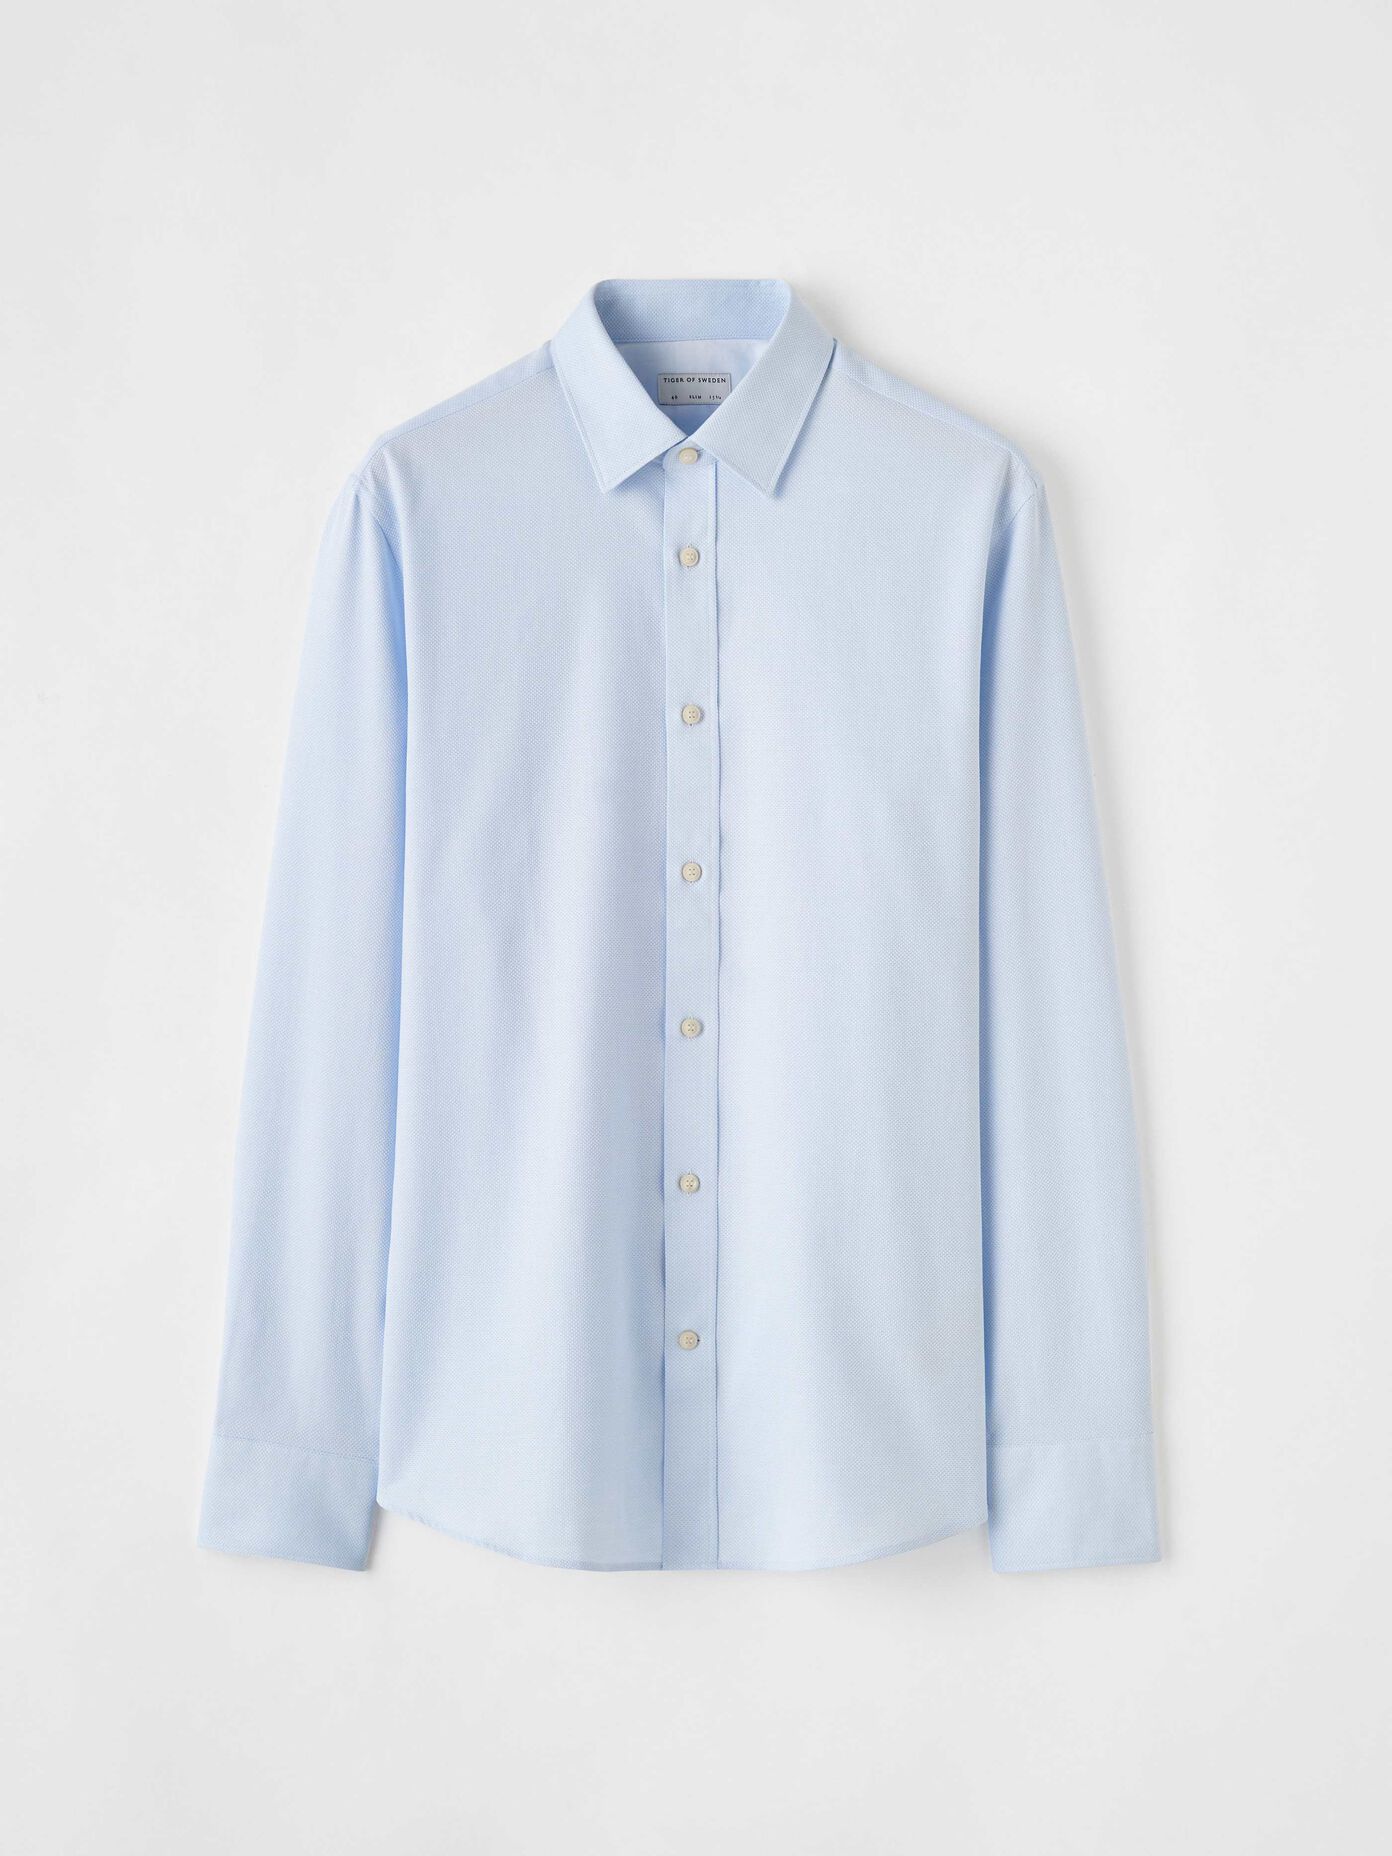 Shirts - Browse short- and long-sleeved shirts online at Tiger of Sweden